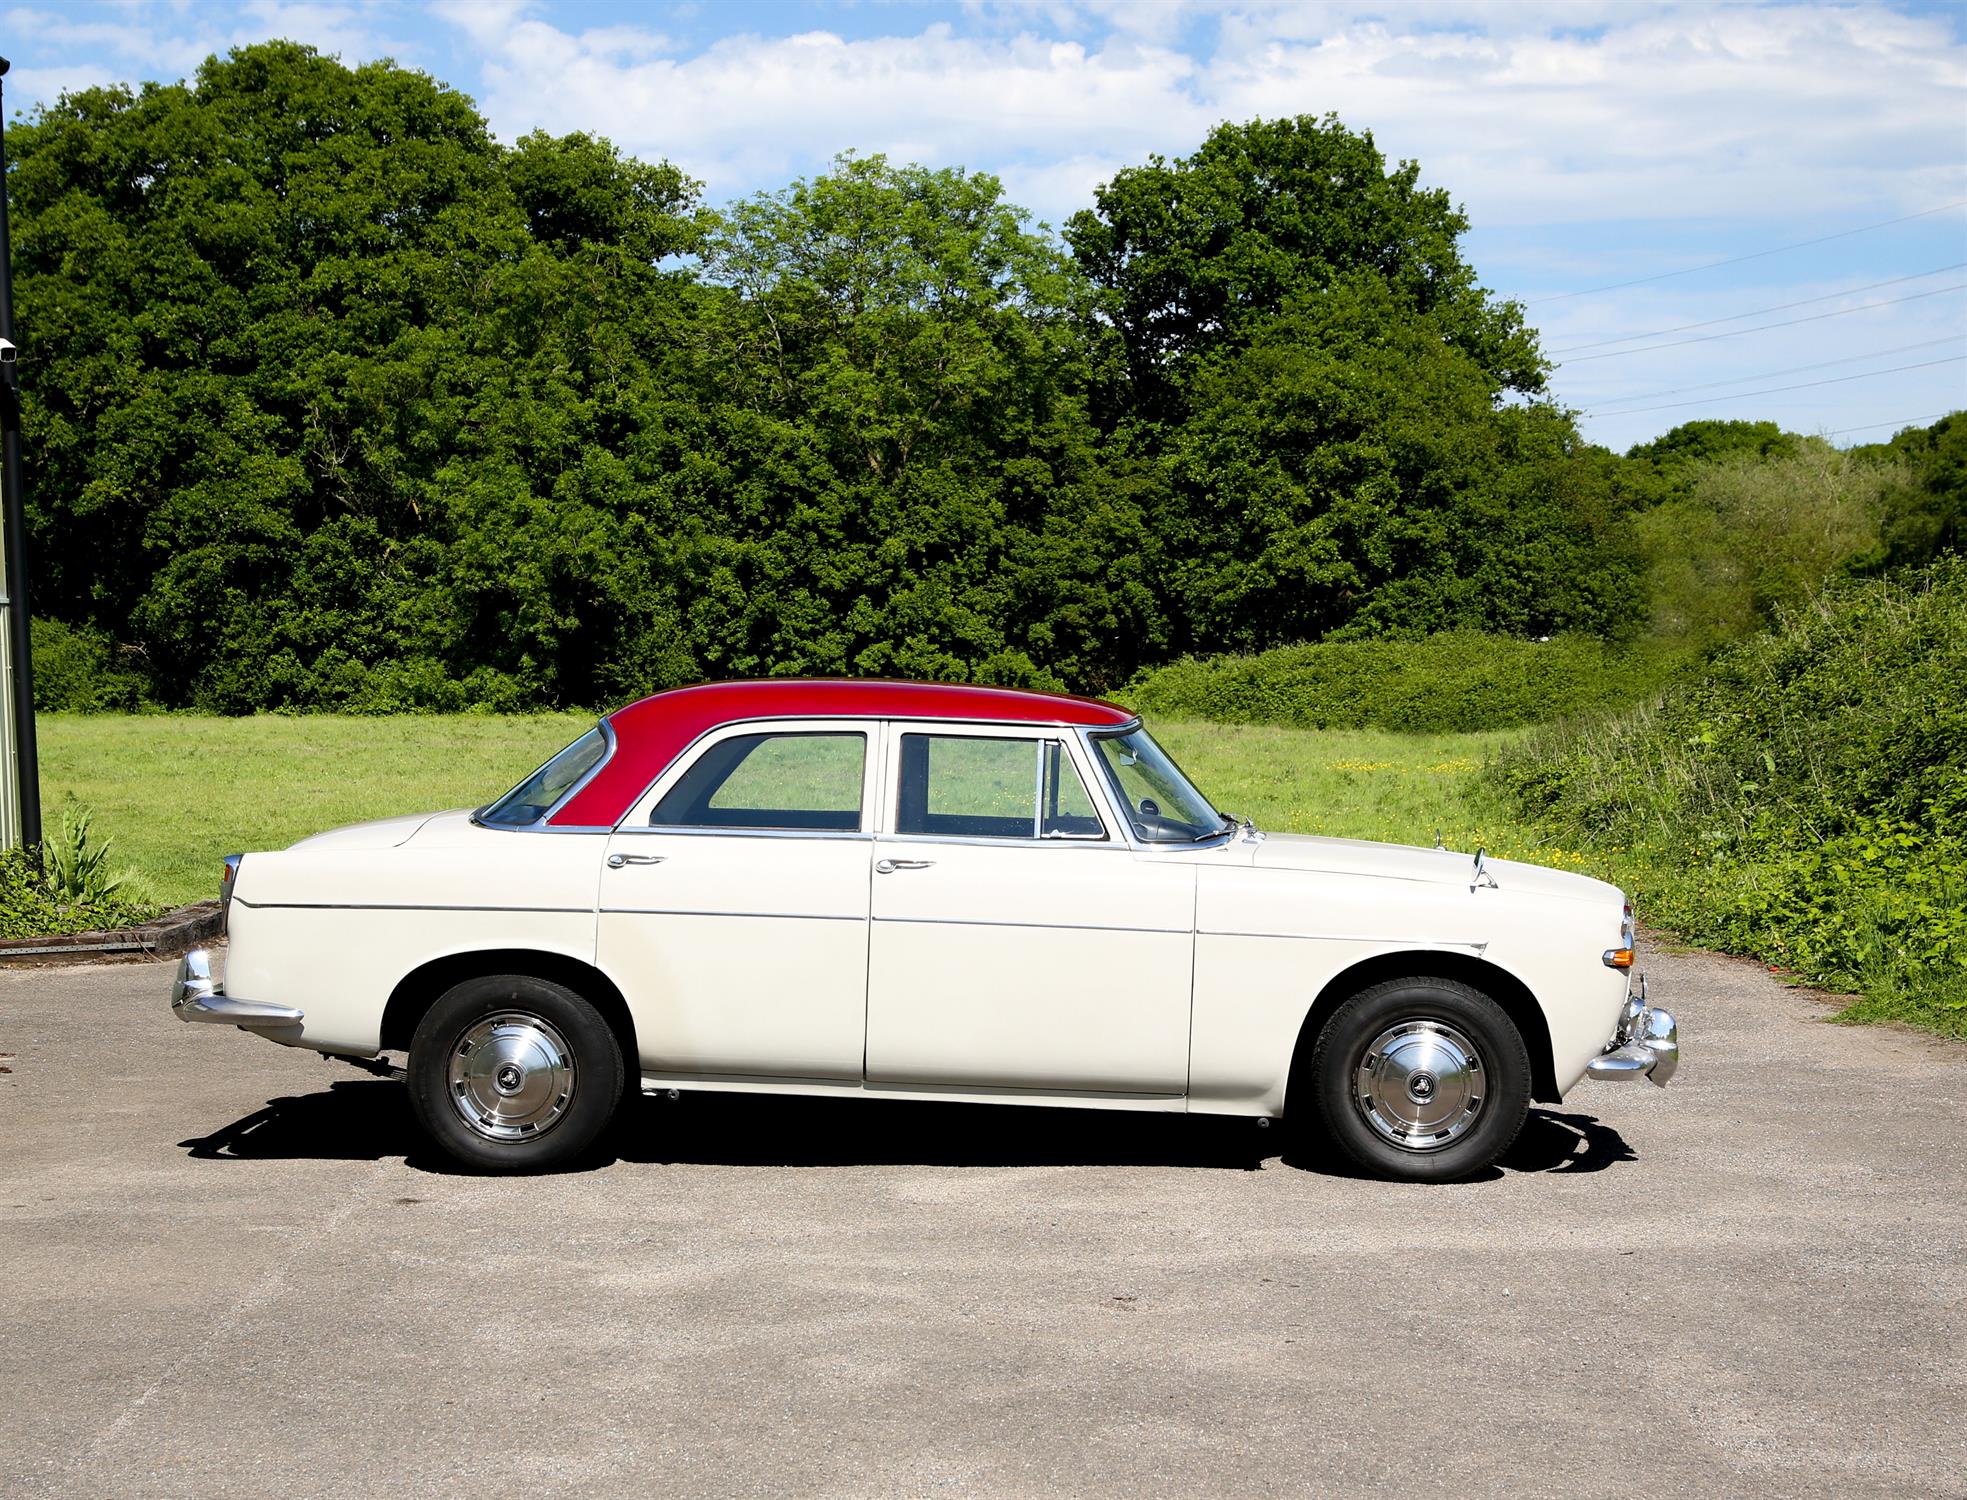 Rover P5 mk1, 1963 saloon car. Registration number 269 LPX. - Rover P5 mark 1, 1963 saloon - A - Image 2 of 4